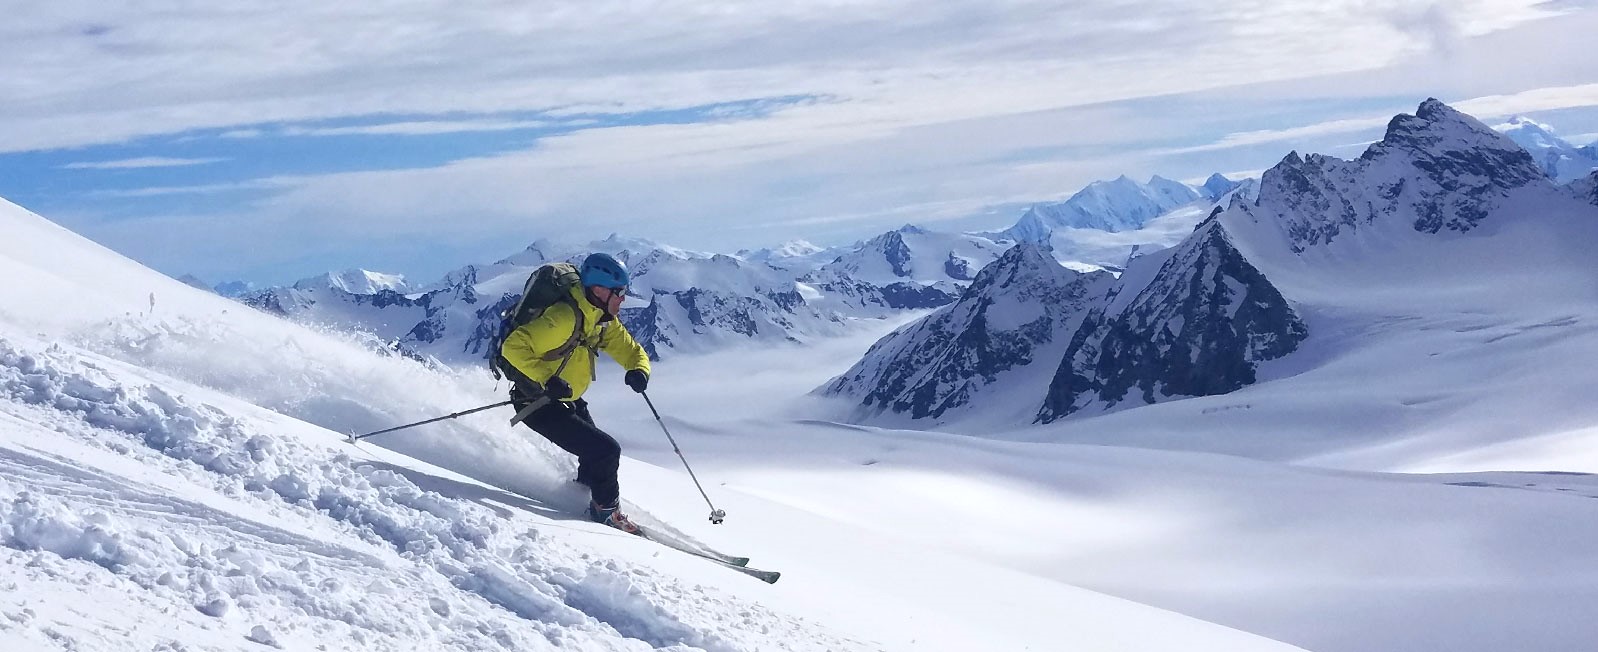 Man in yellow jacket skis the Alaskan backcountry